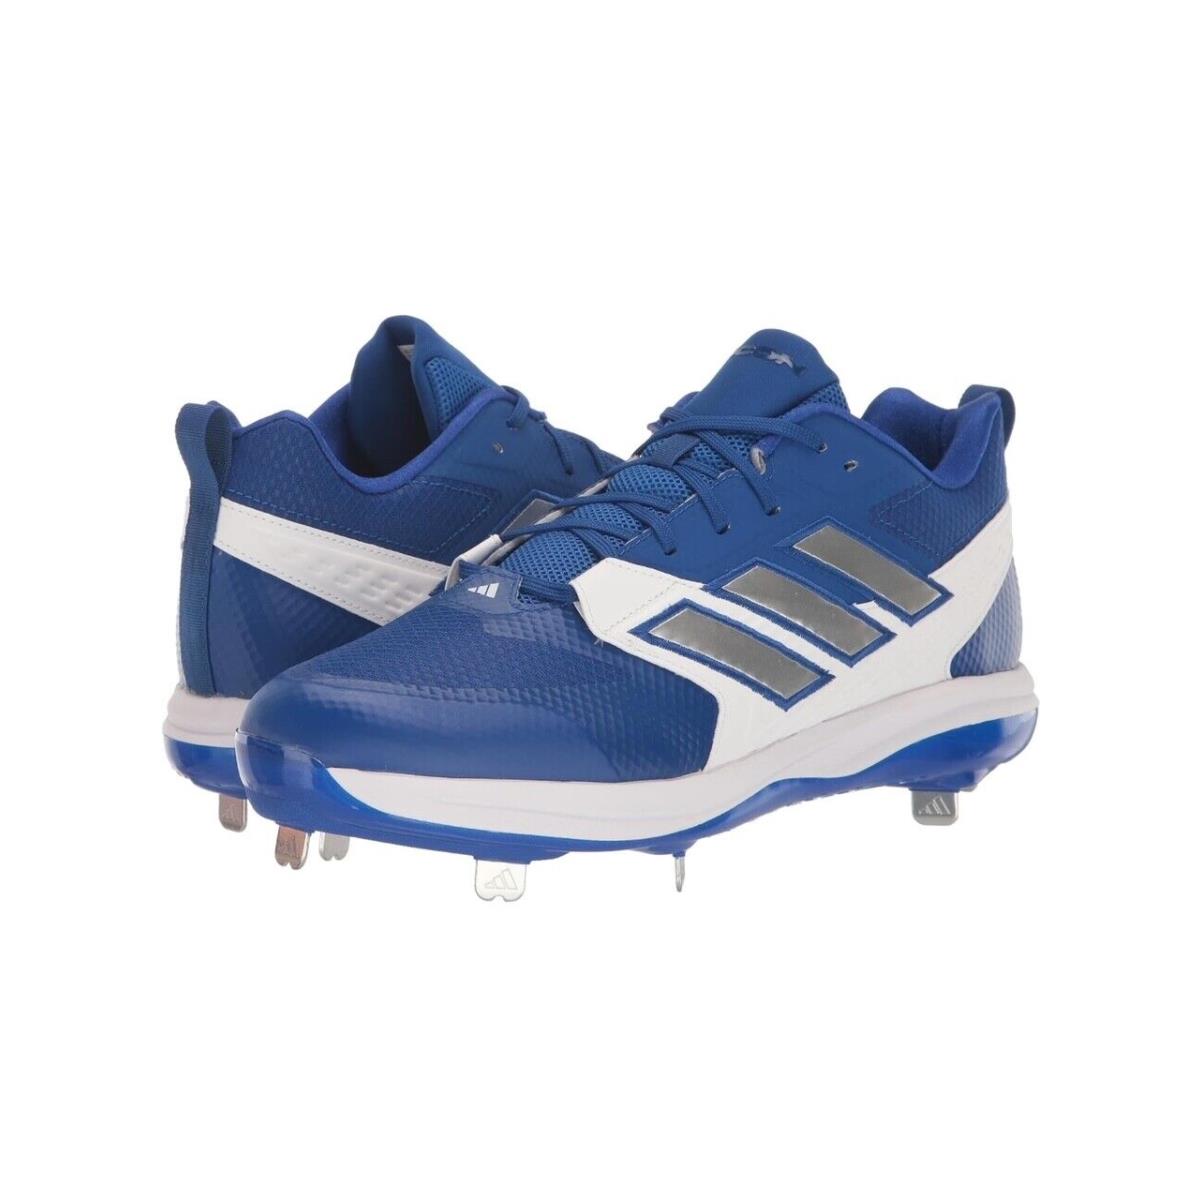 Adidas Men`s Icon 8 Mid Cleats Team Royal Blue/silver Metallic/white 12 M - Team Royal Blue/Silver Metallic/White